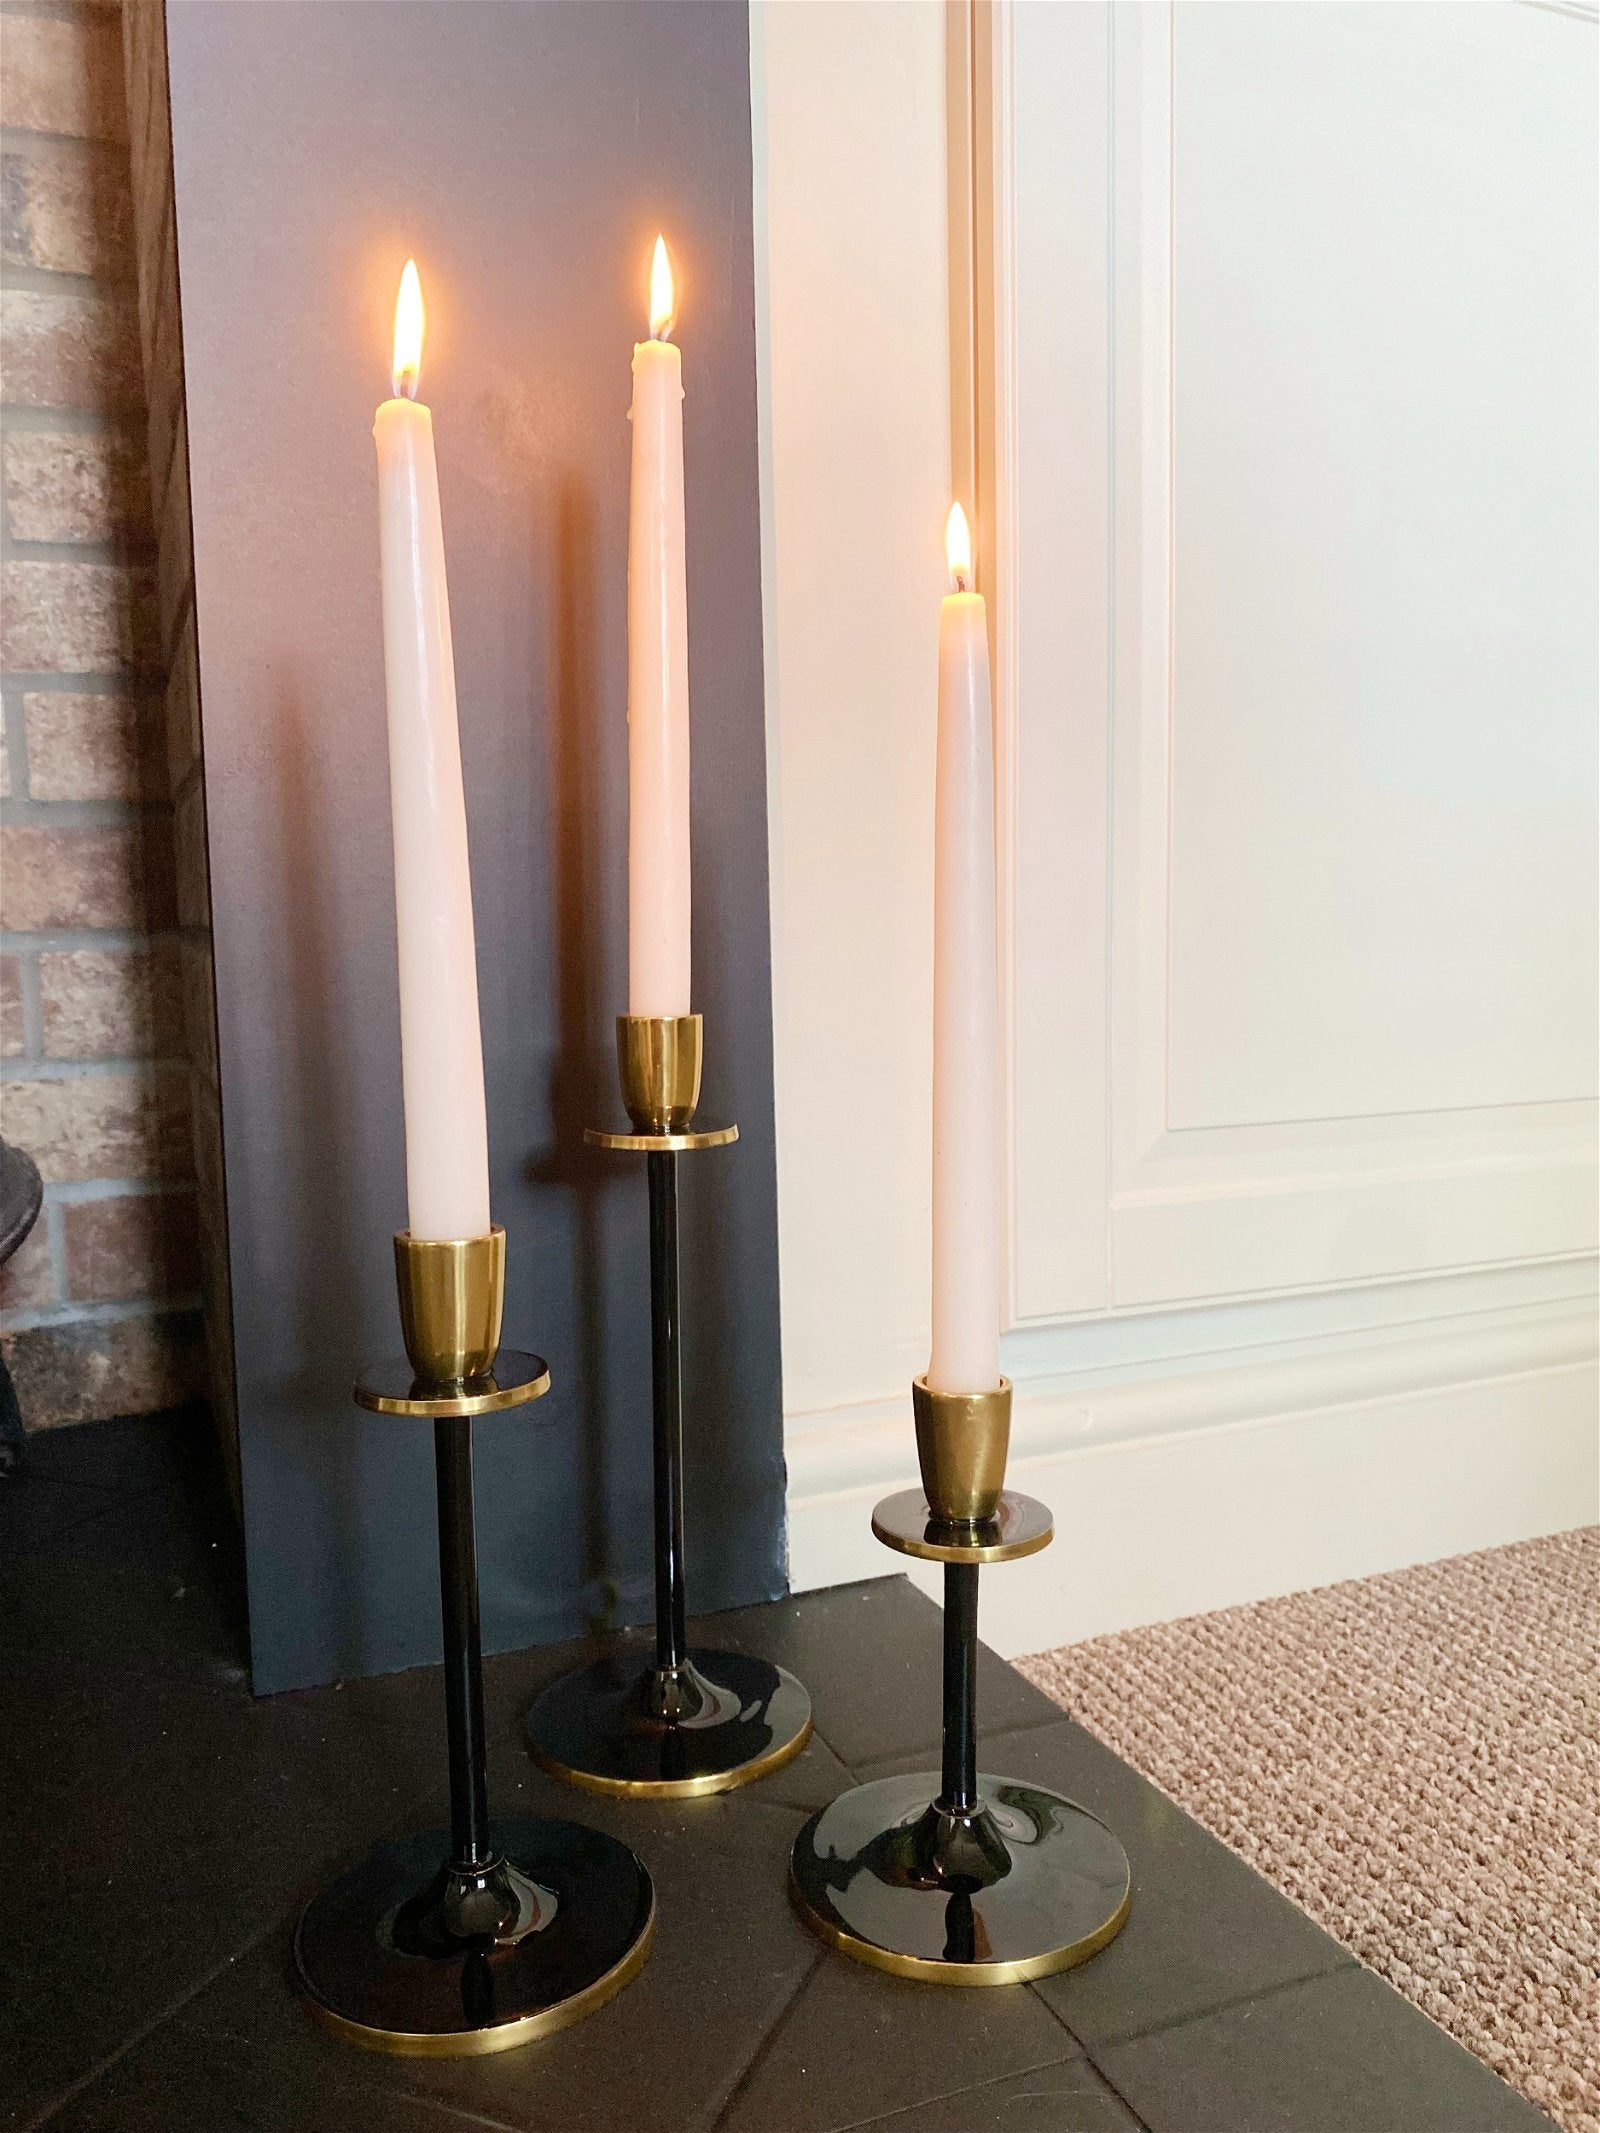 Small Black and Gold Candlestick - a Cheeky Plant